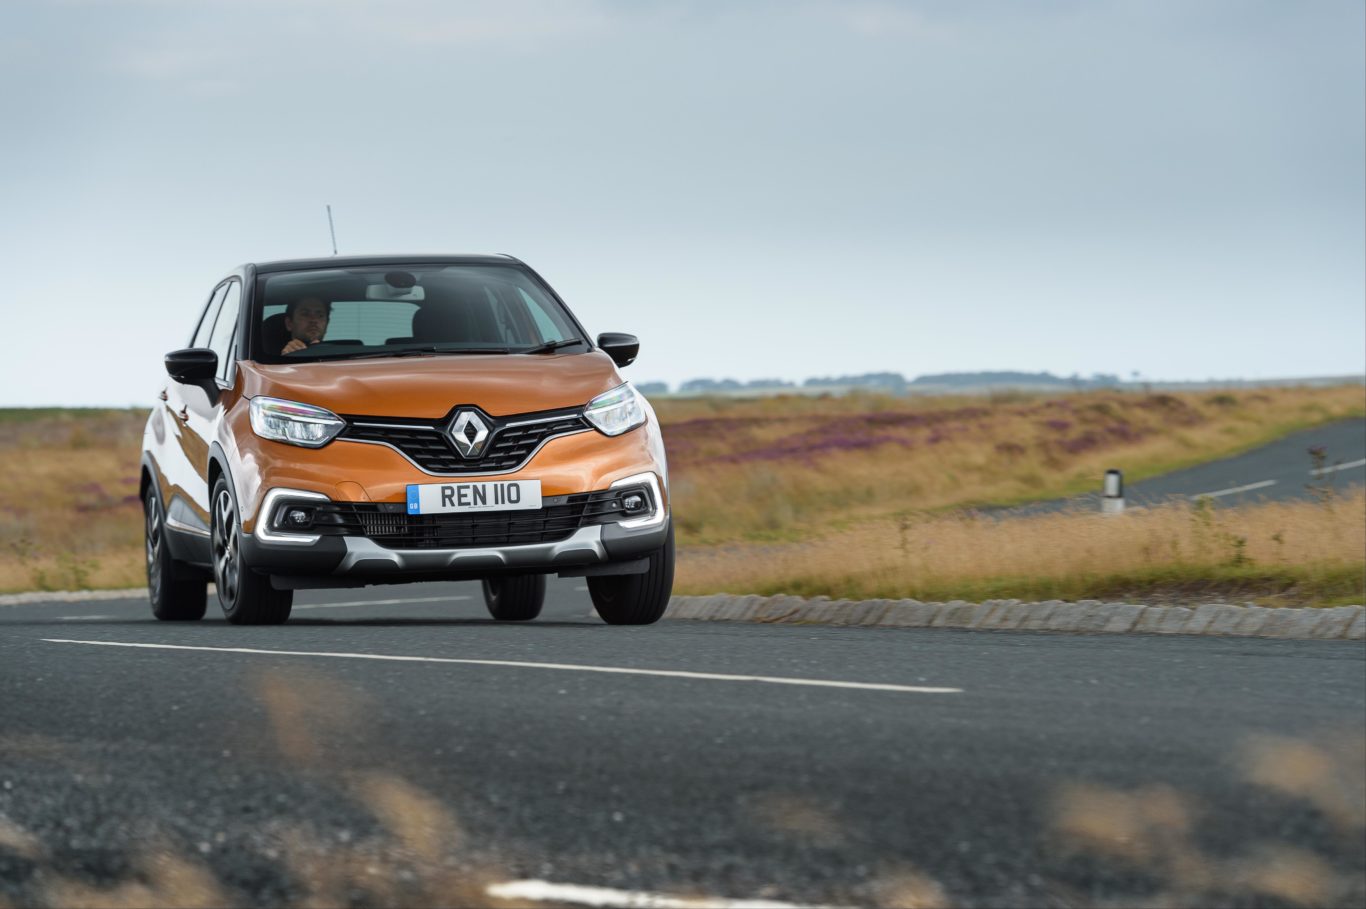 The Captur is based on the same platform as the Clio